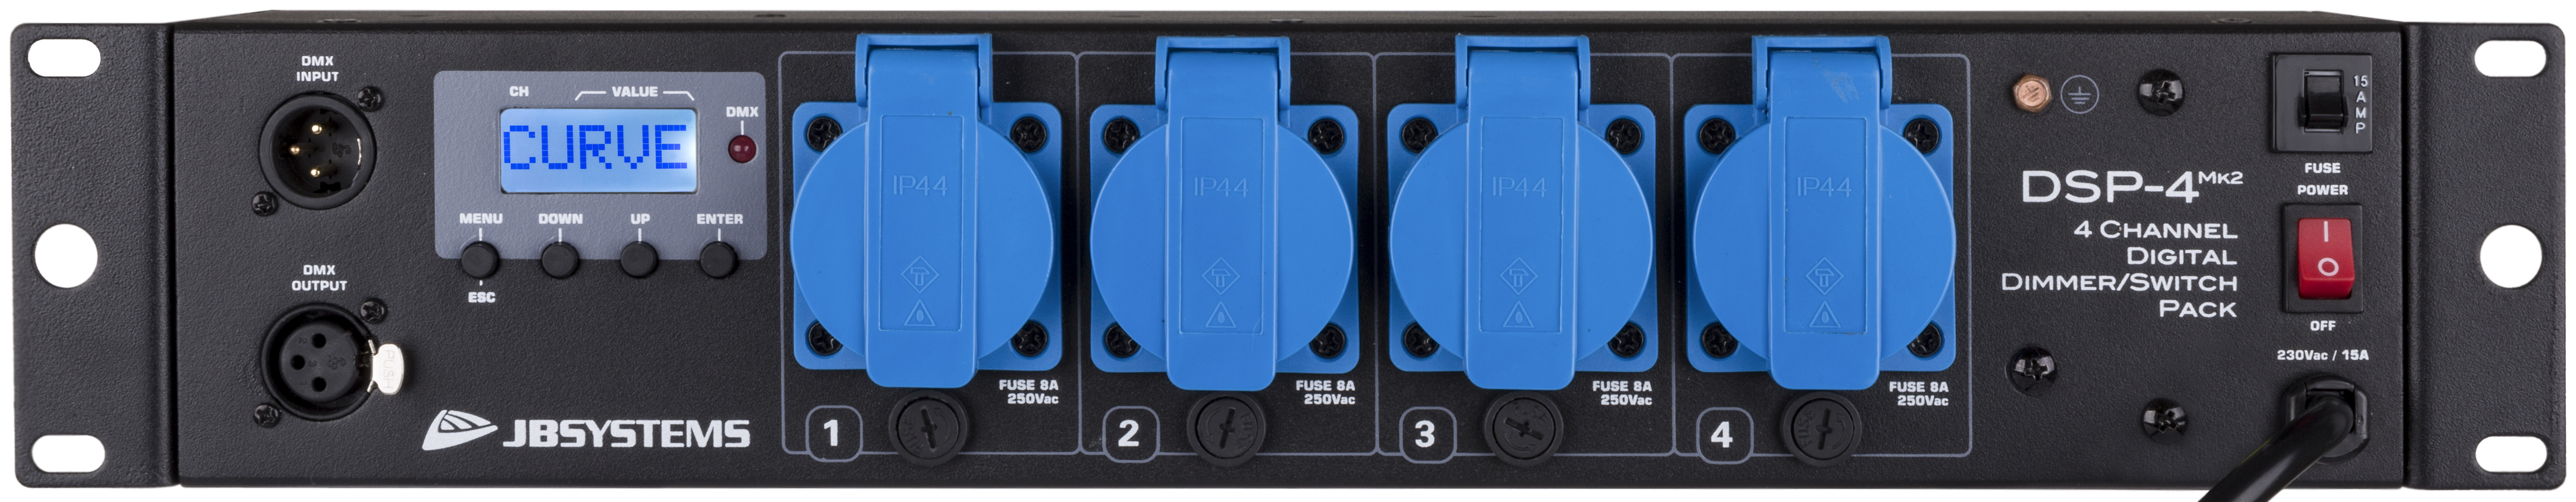 Multi functional dimmer/switch pack equipped with 4 mains sockets (French Schuko).